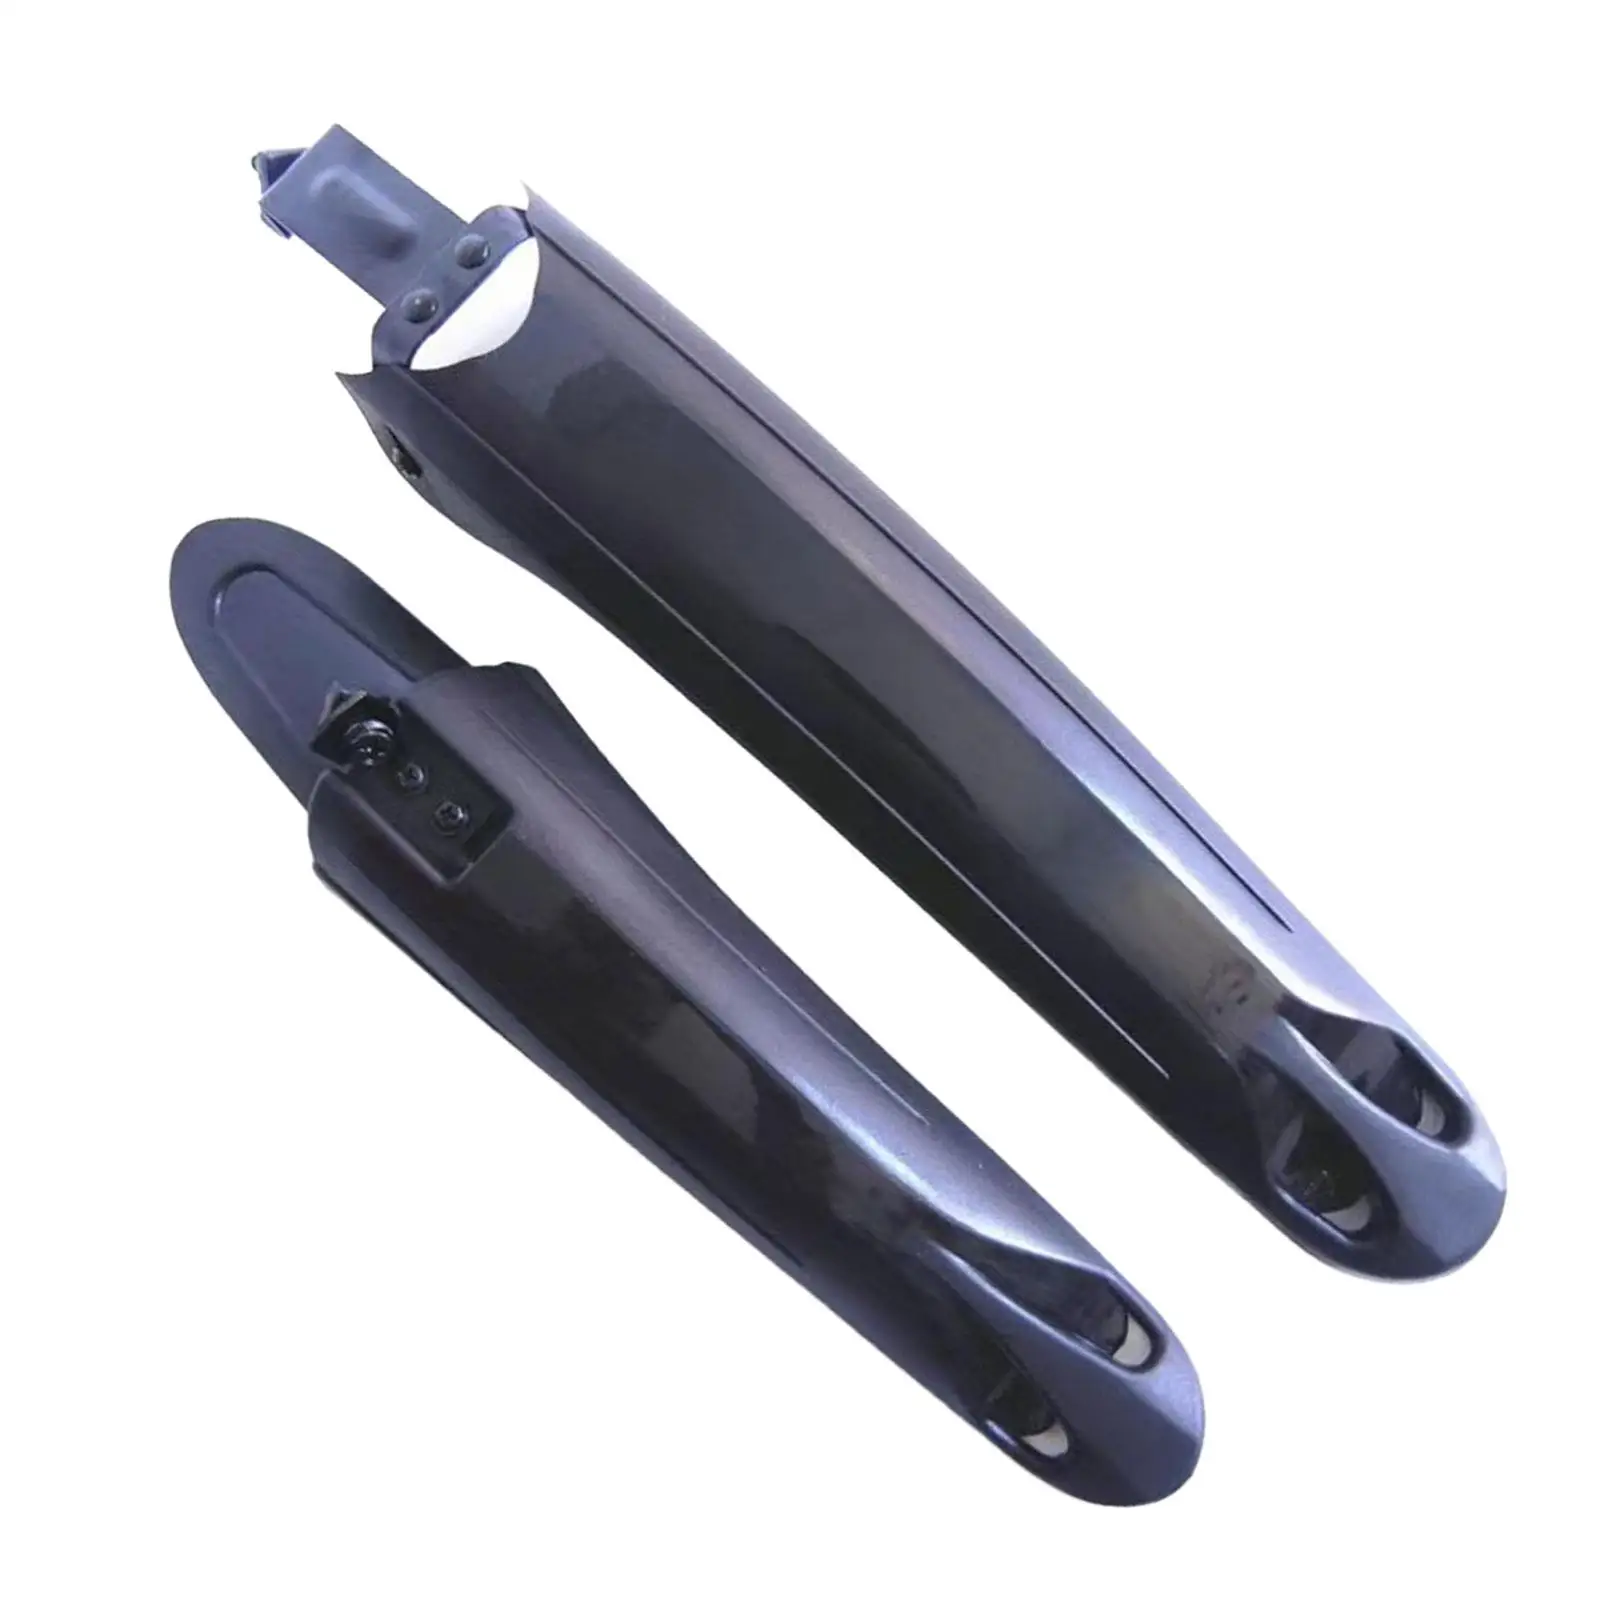 Generic Bicycle Bike Mudguards Replace Repair Parts Easy to Install Sturdy Spare Parts DIY Accessories Bicycle Fenders Mudflap